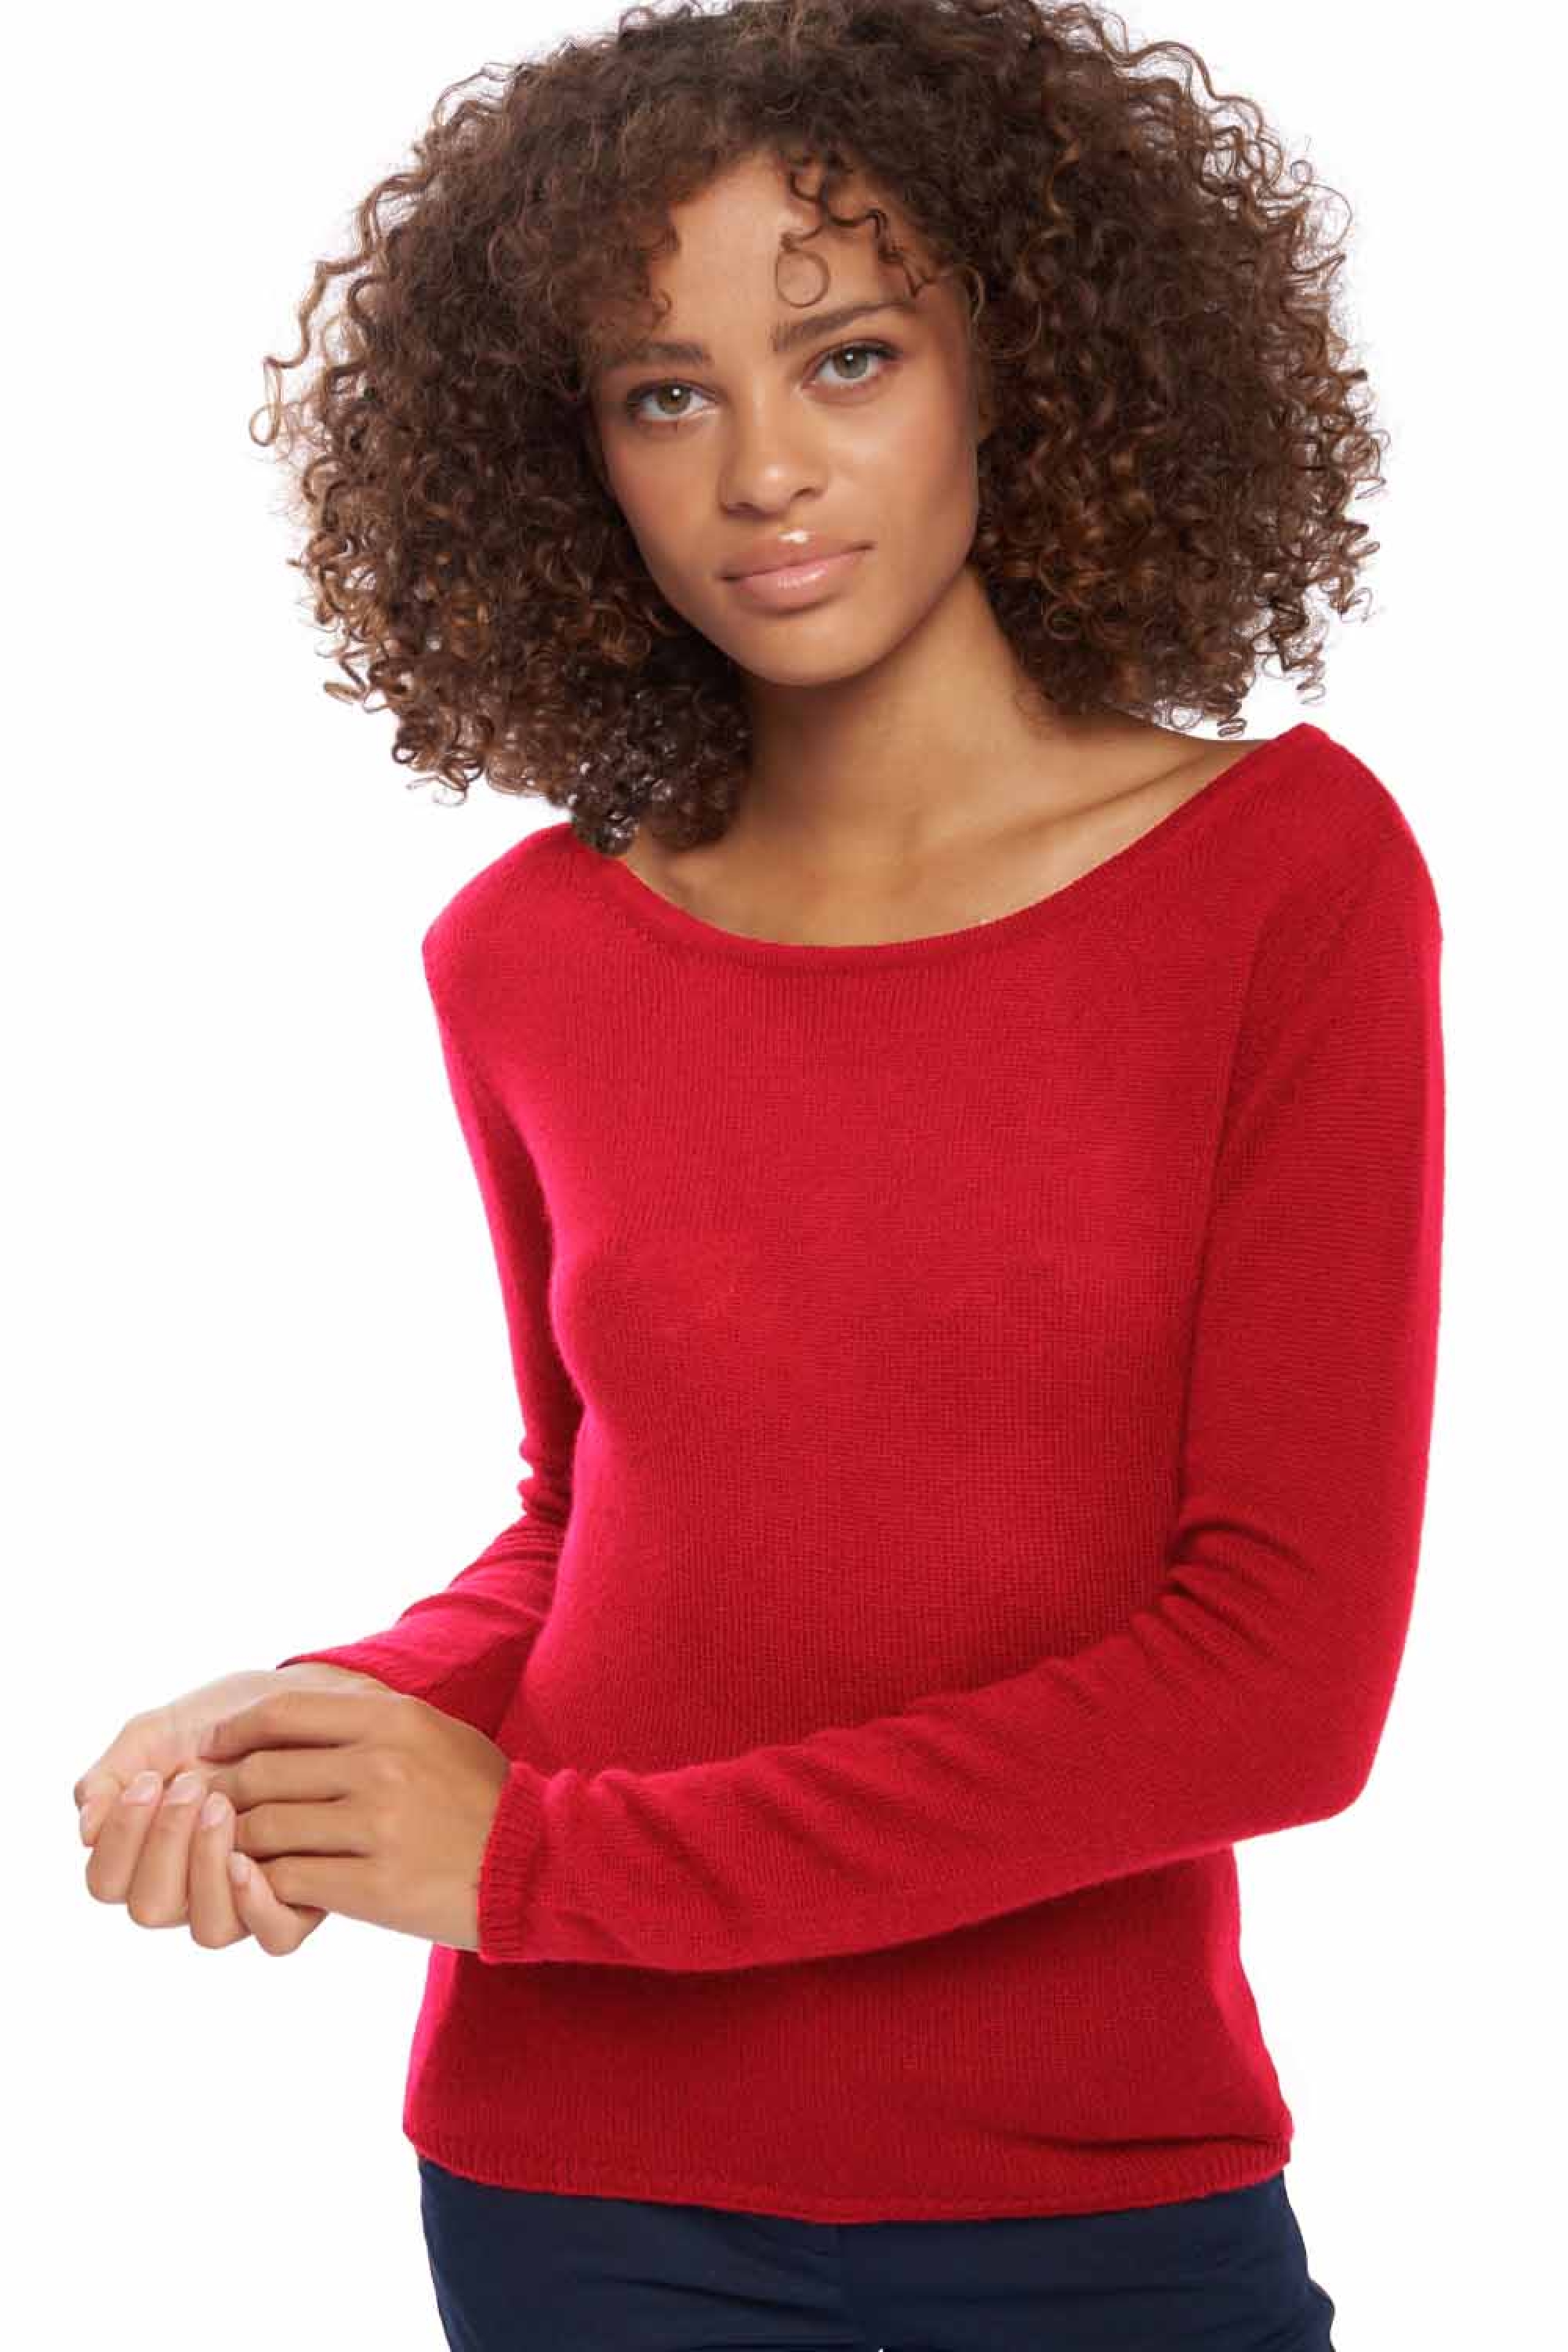 Cachemire pull femme caleen rouge velours 2xl